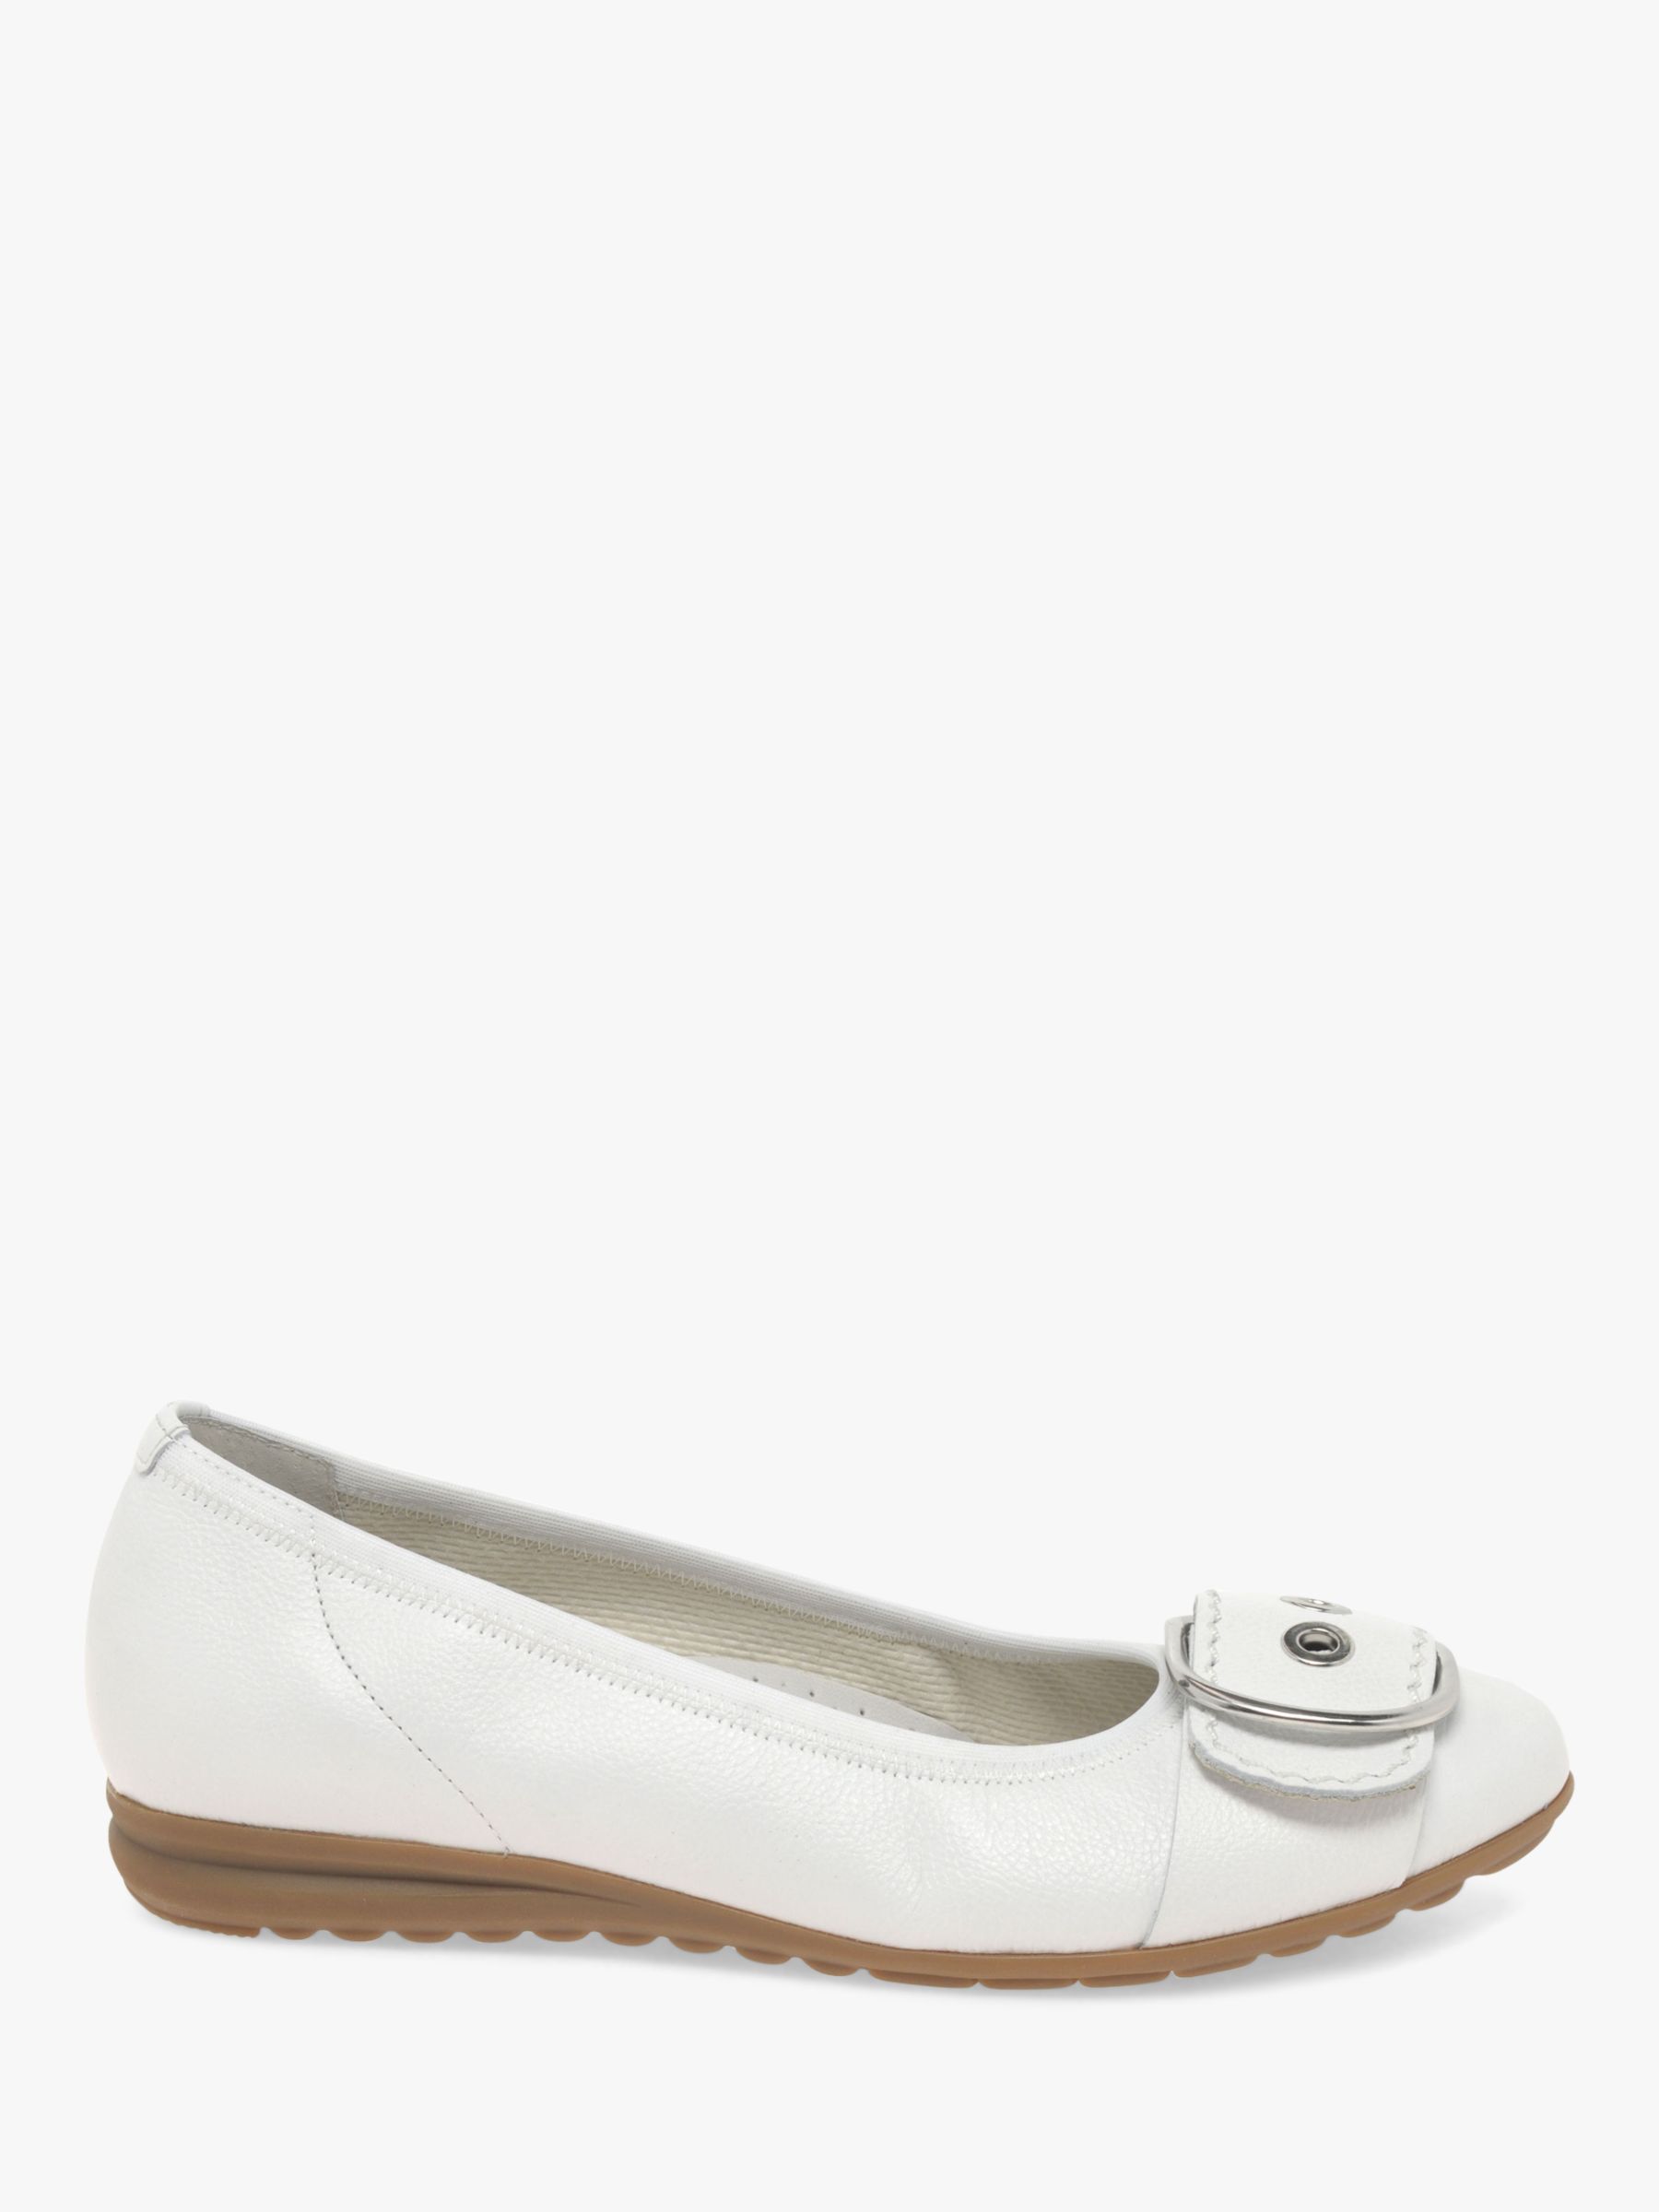 Gabor Saviour Leather Wide Fit Pumps, White